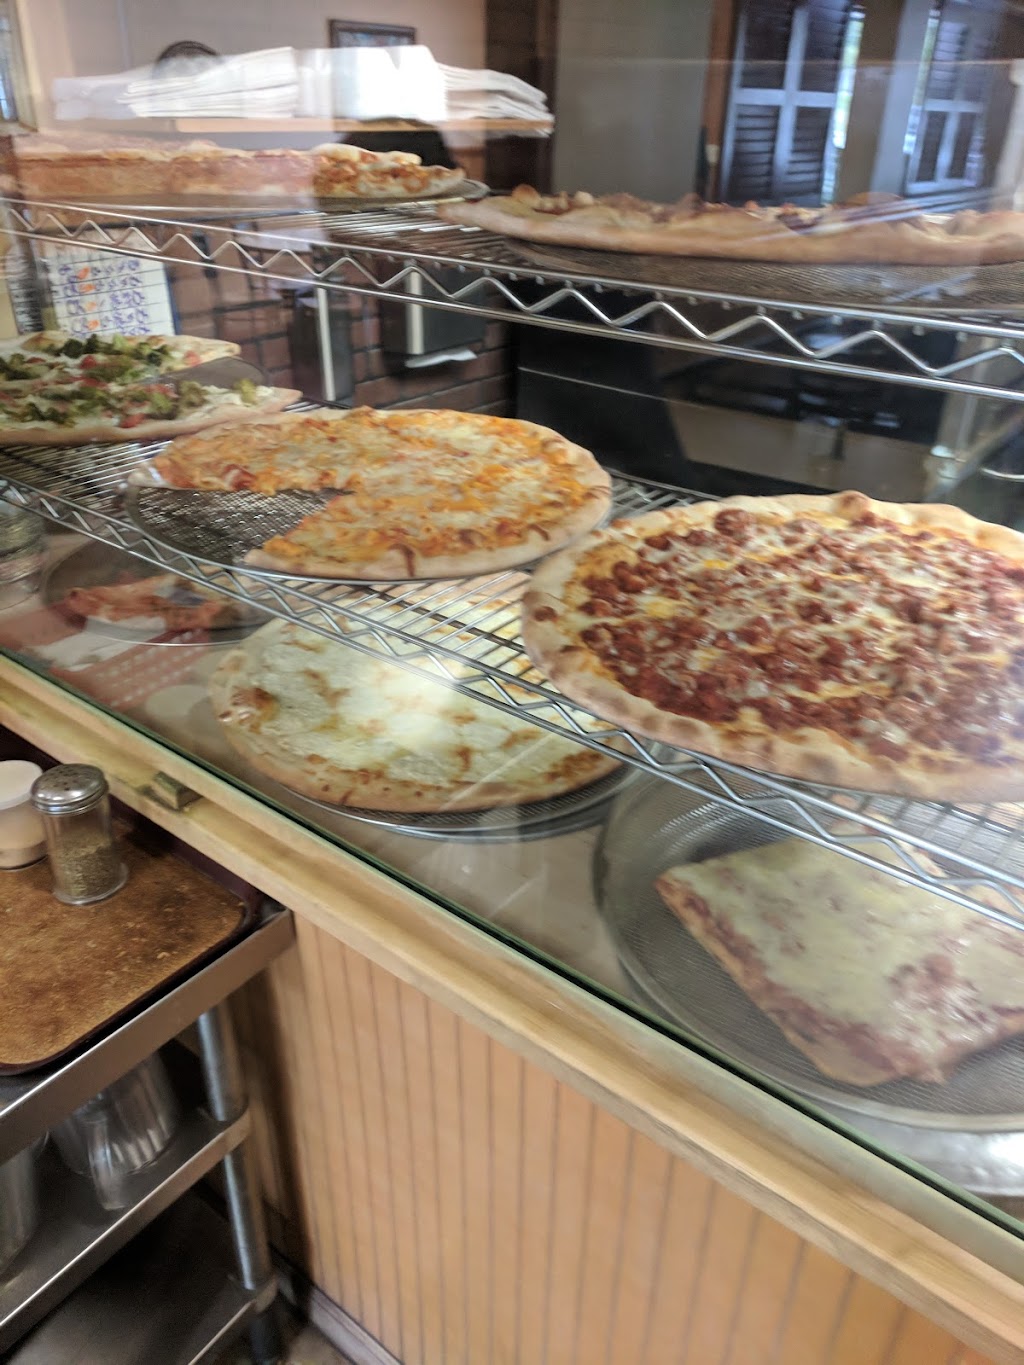 Tinas Pizza Cafe & Restaurant | 69 Brookside Ave #205, Chester, NY 10918 | Phone: (845) 469-4357